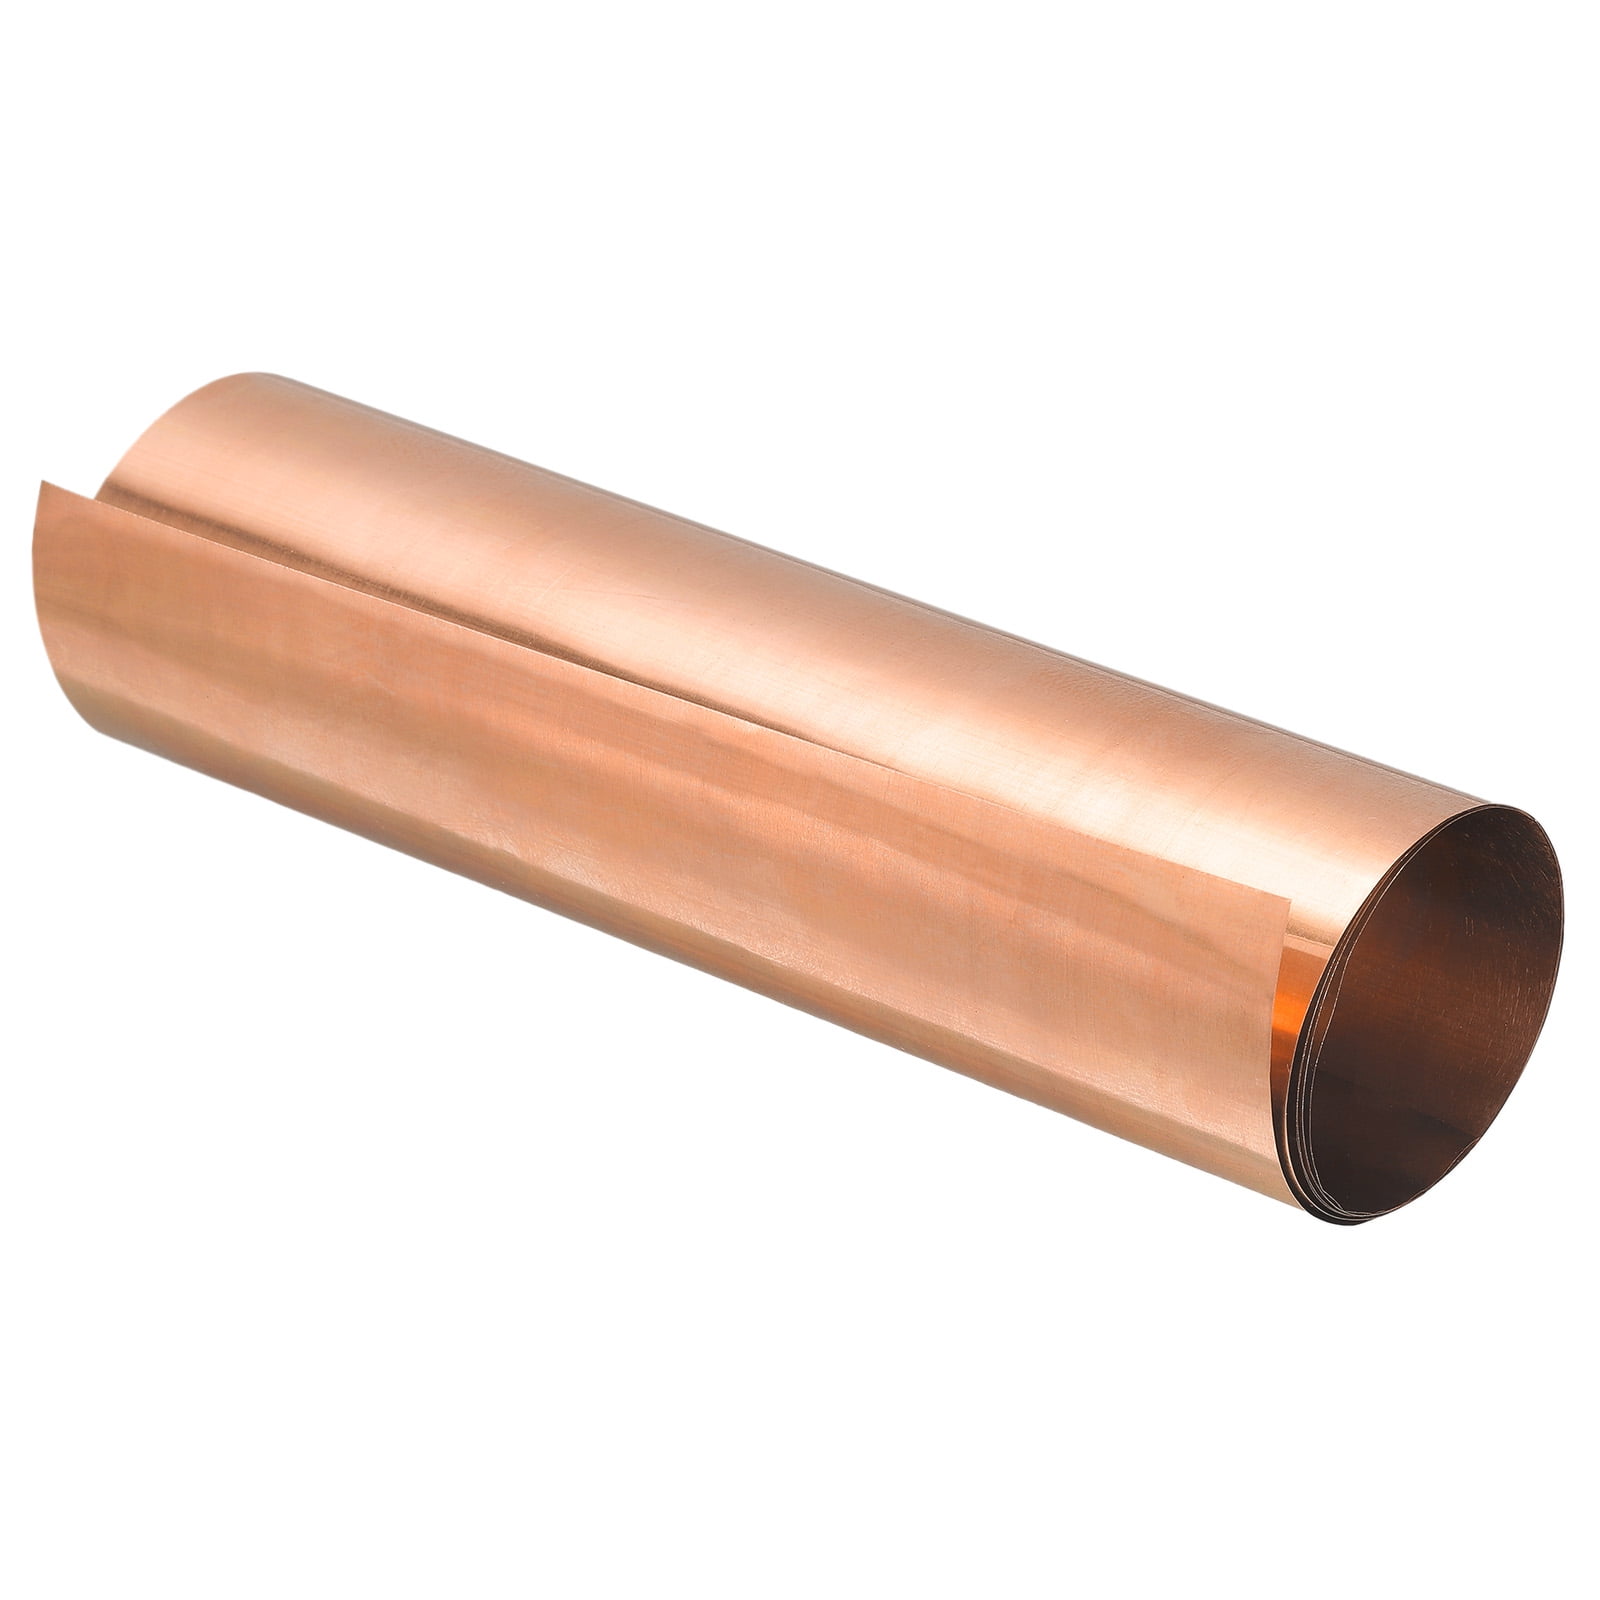 Uxcell Copper Thin Foil Roll Sheet, 0.05x30x1000mm Pure Copper Foil Sheet  Roll Copper Strip